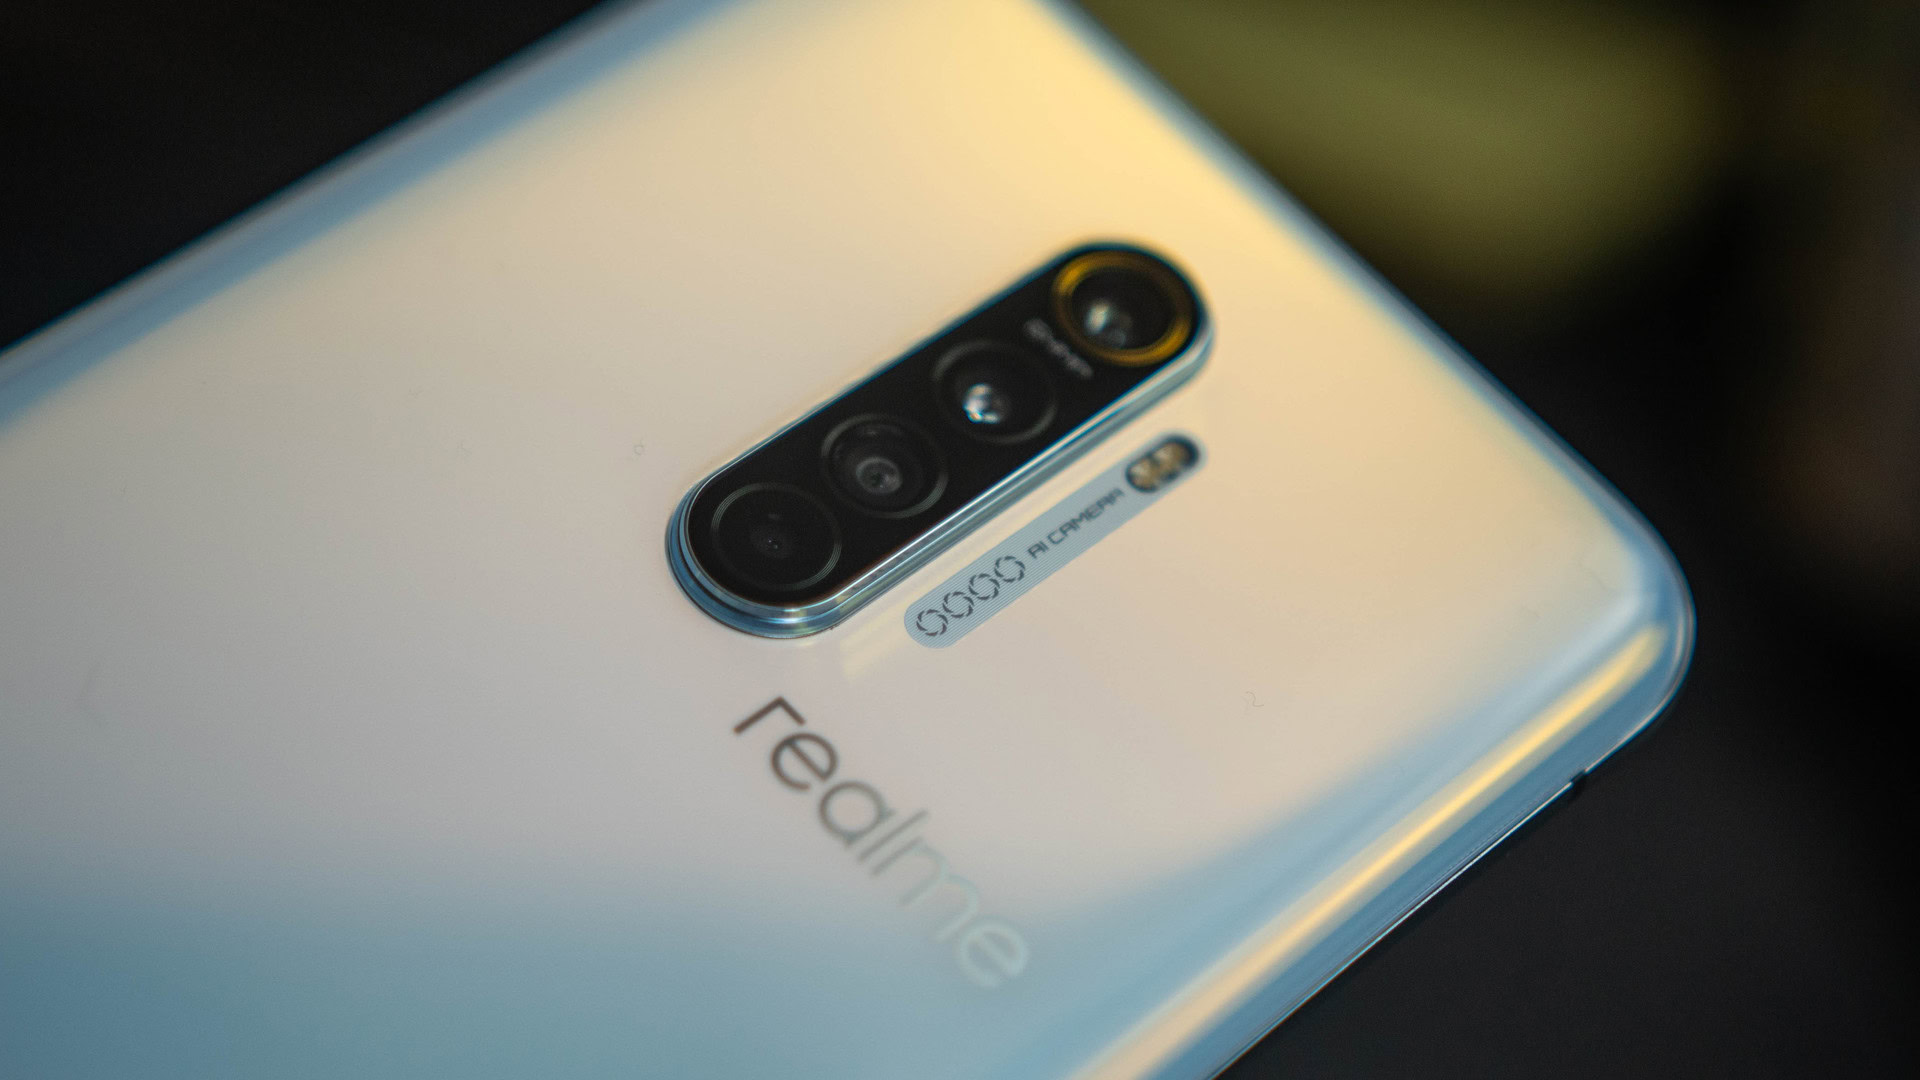 realme X2 Pro review: The best value smartphone around? - Android Authority